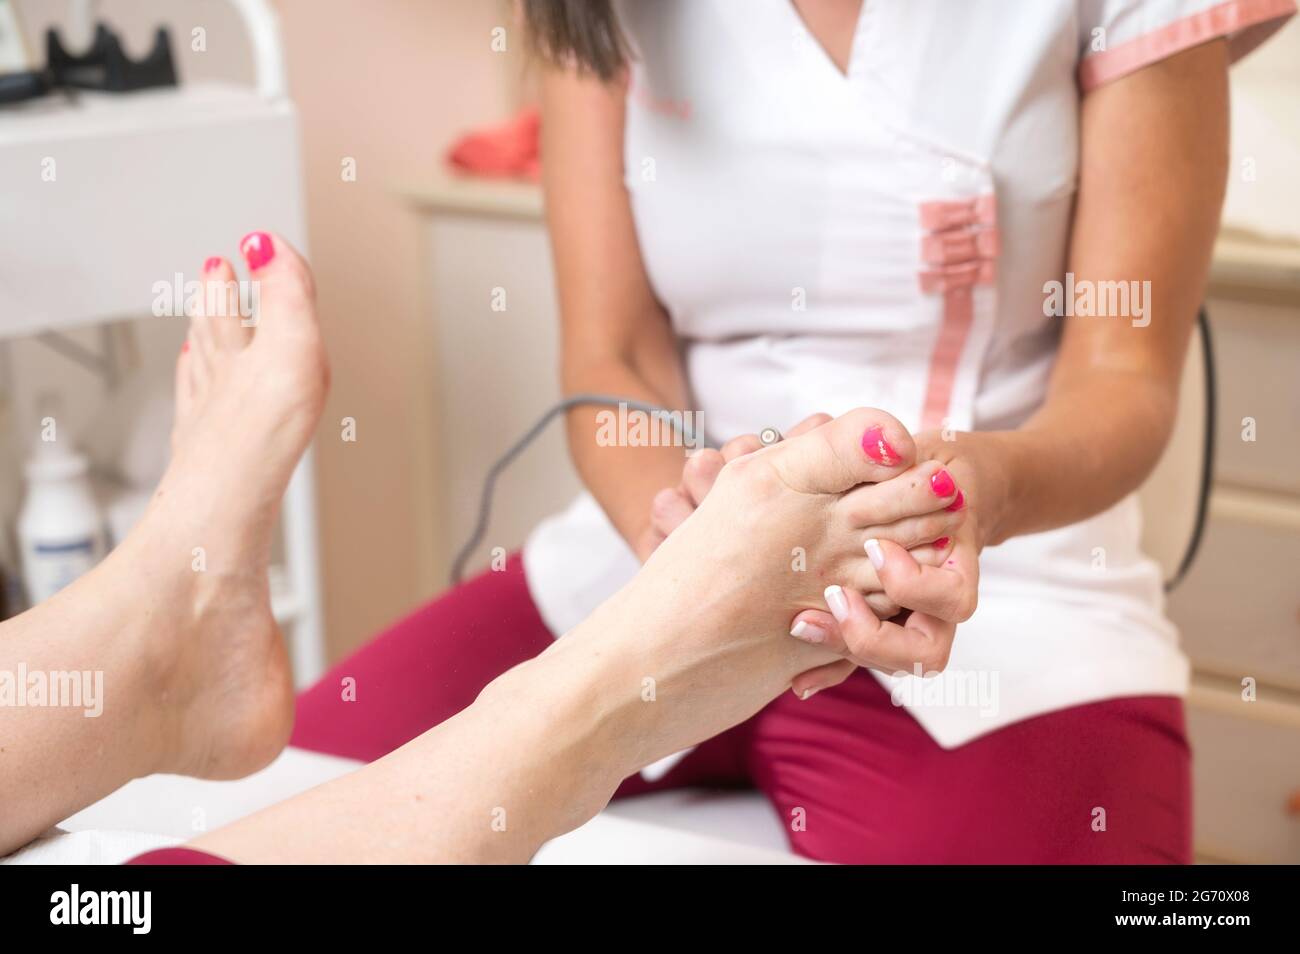 Medicinal Pedicure. The Doctor Removes The Imprint On The Foot With A  Scalpel Stock Photo, Picture and Royalty Free Image. Image 77227900.